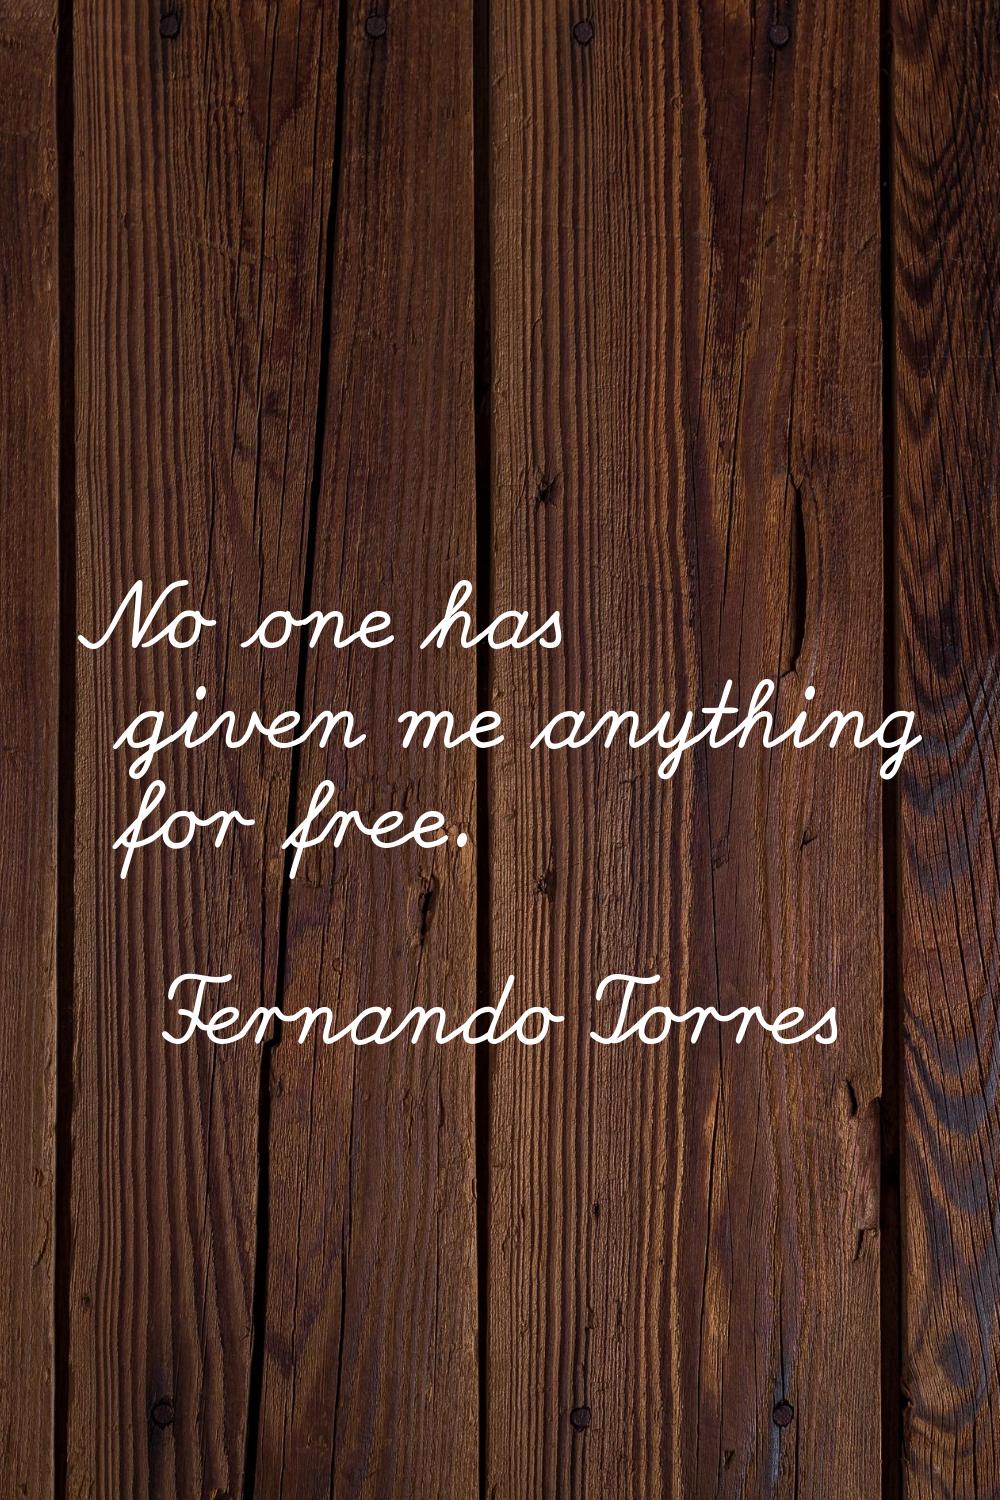 No one has given me anything for free.